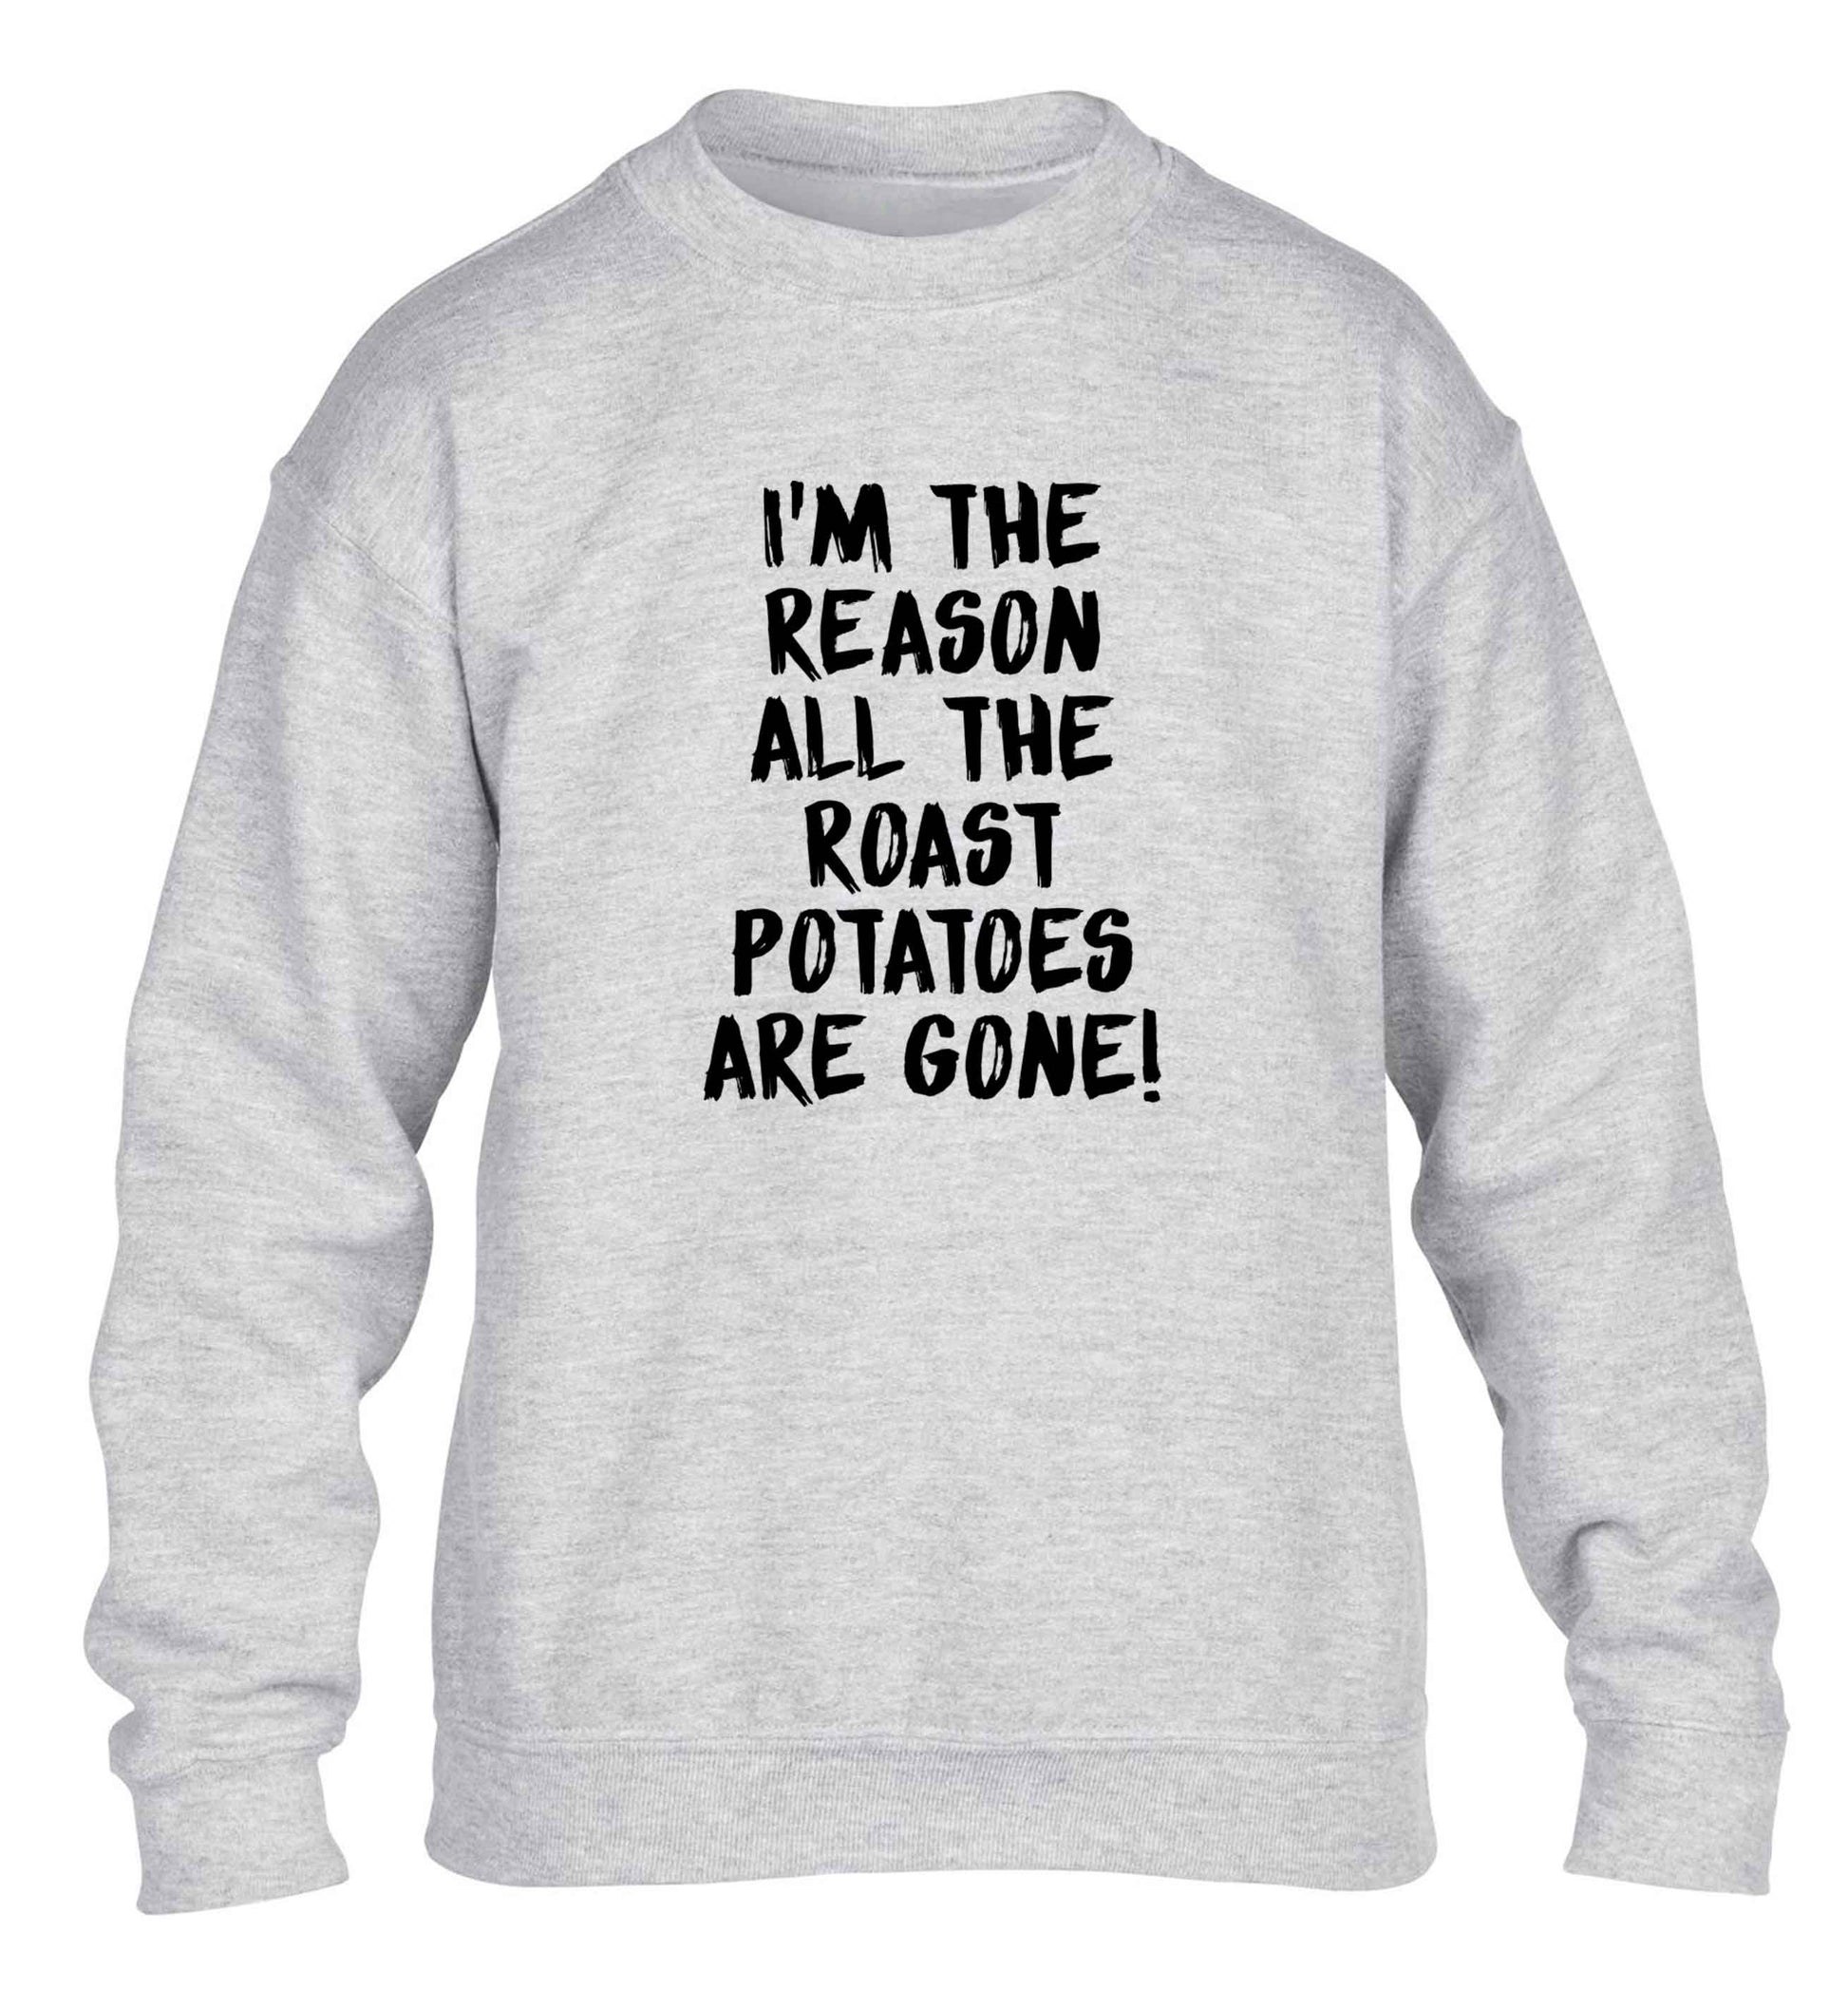 I'm the reason all the roast potatoes are gone children's grey sweater 12-13 Years